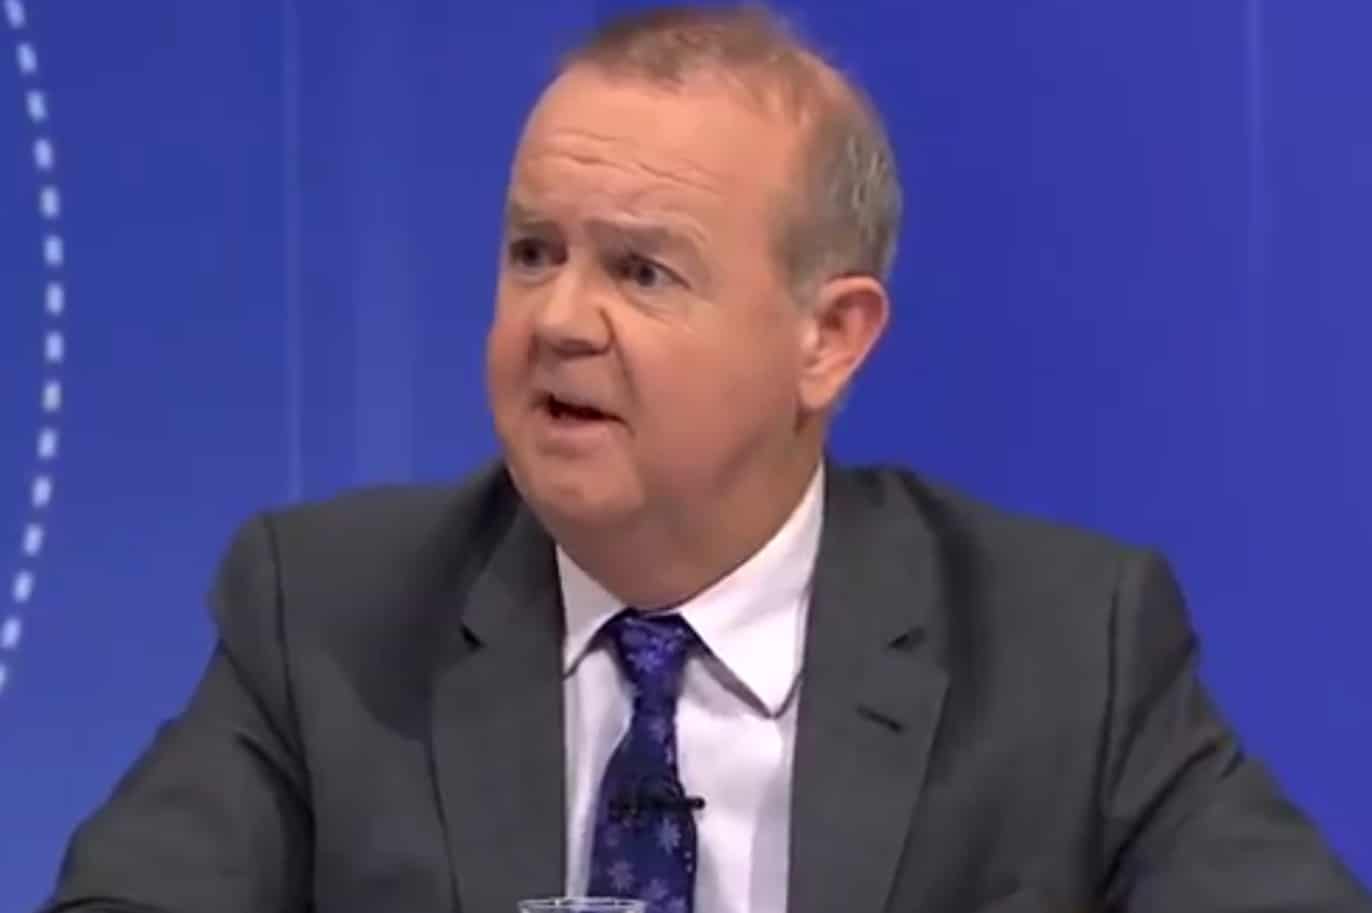 Ian Hislop’s post-referendum comments are more relevant now than ever